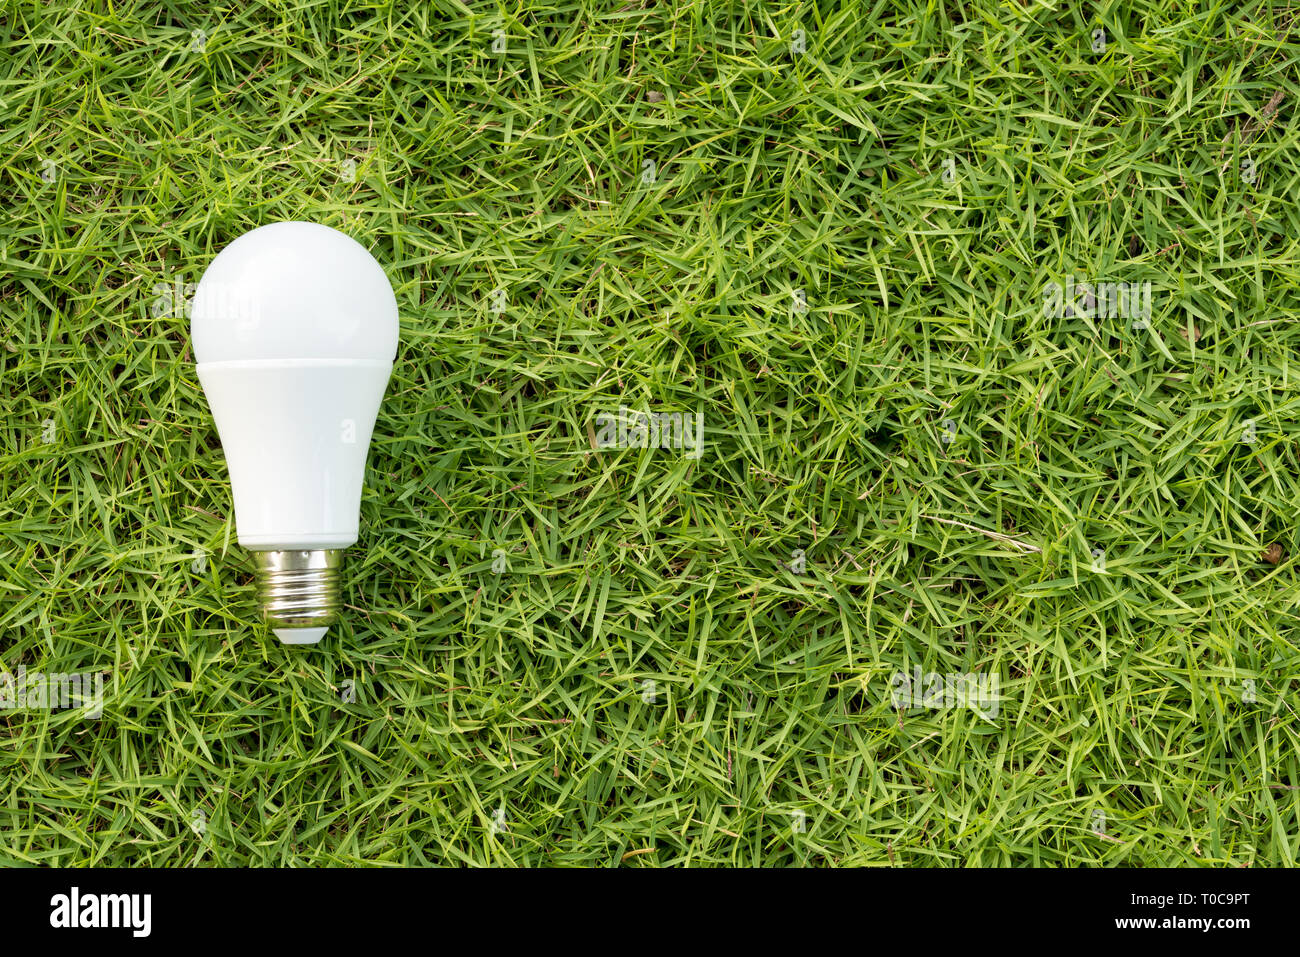 Concept of green energy. The LED light bulb on a green grass field Stock Photo